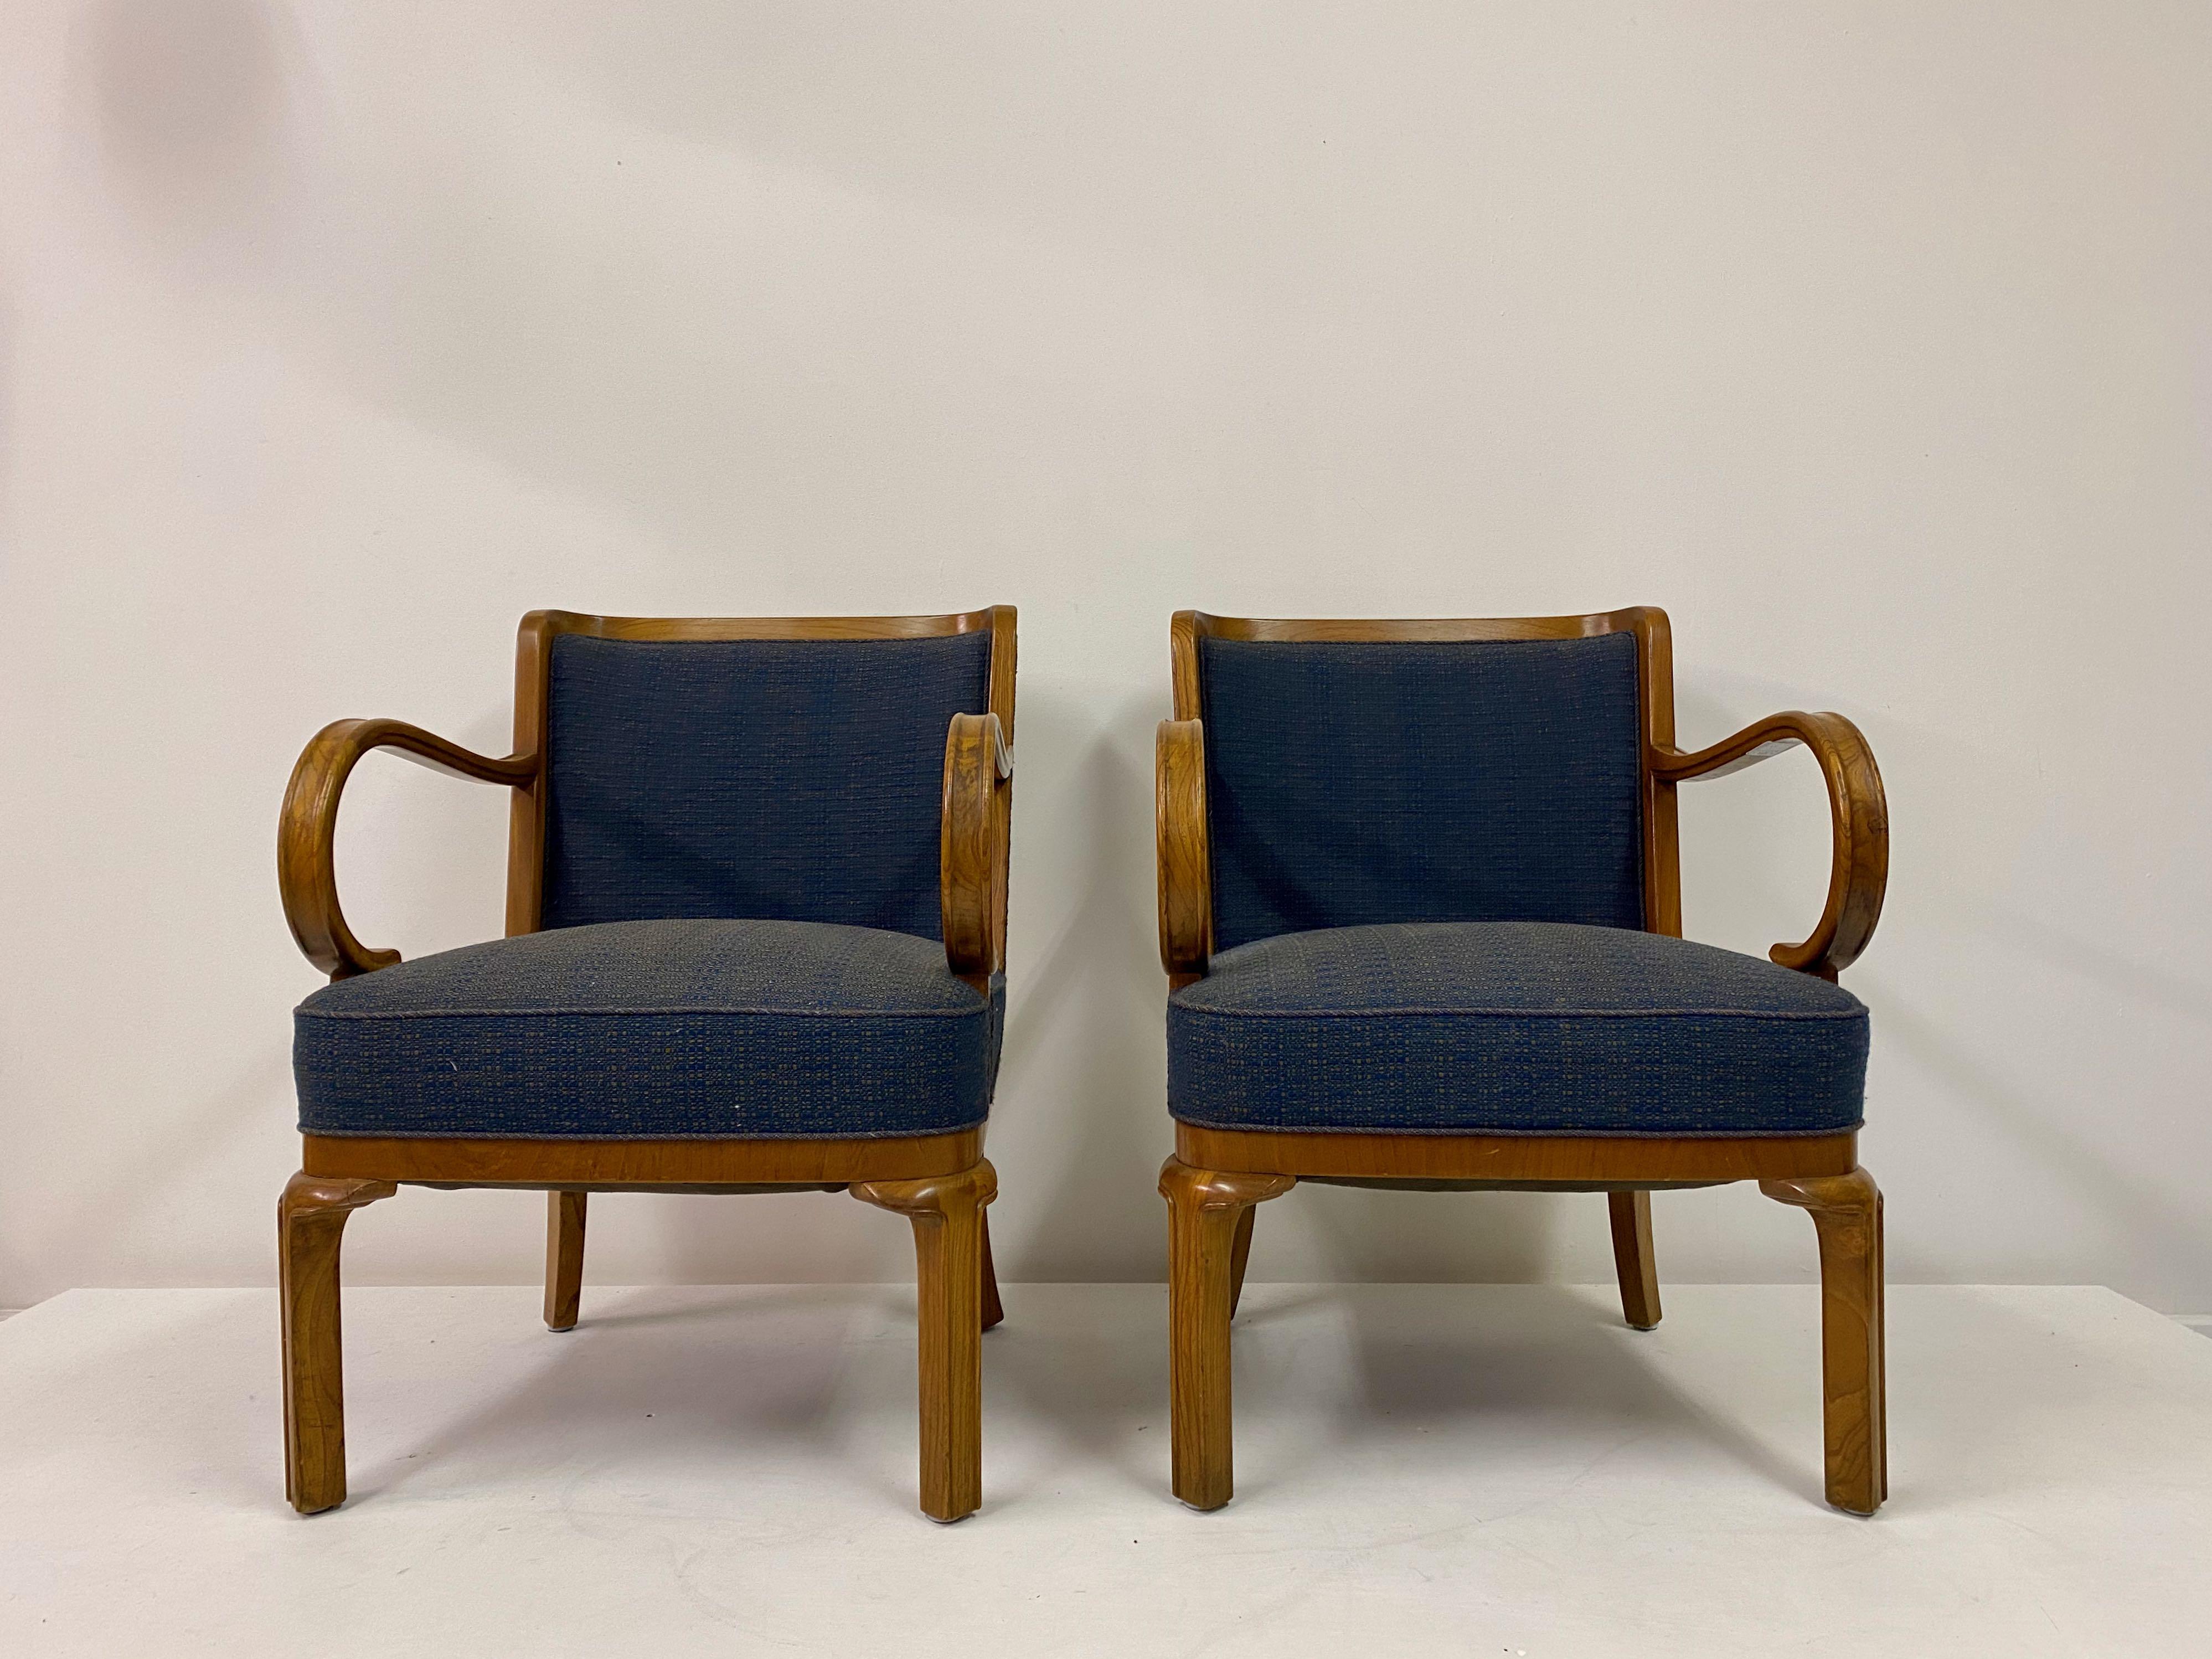 A pair of armchairs by Lysberg and Hansen. 

Elm frame.

Wool upholstery. 

Similar chairs seen in Grete Jalk: The Copenhagen Cabinetmakers Guild Exhibitions 1927-1966, Vol 1, Pg 85. 

Danish, 1930s

Measure: Seat height 43cm.